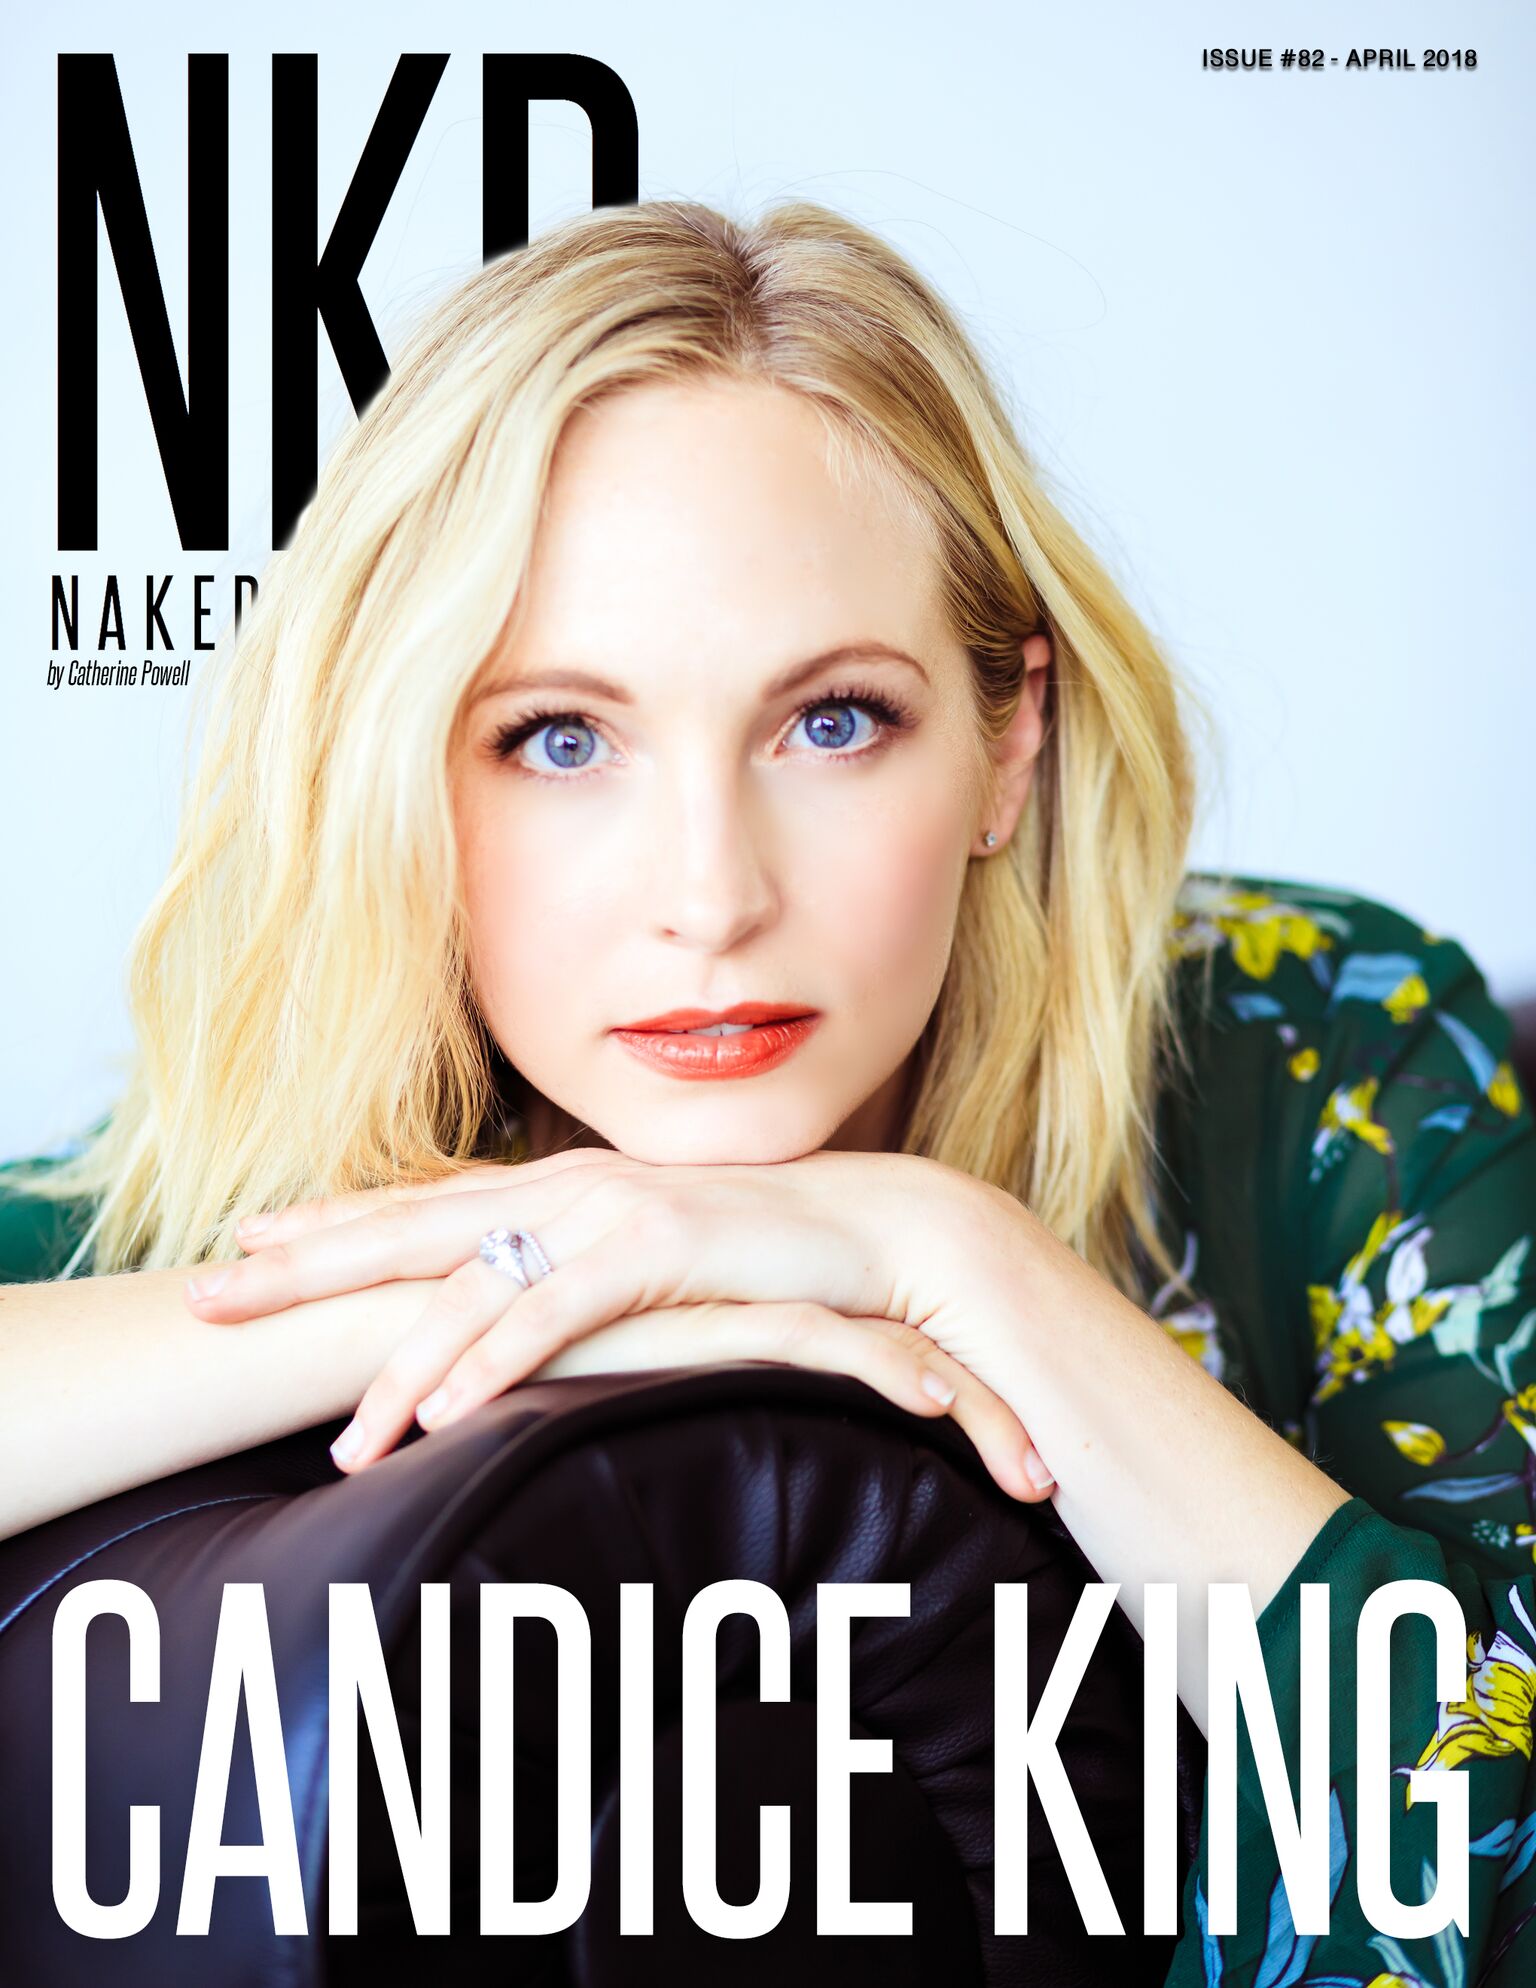 candice king cover.jpg